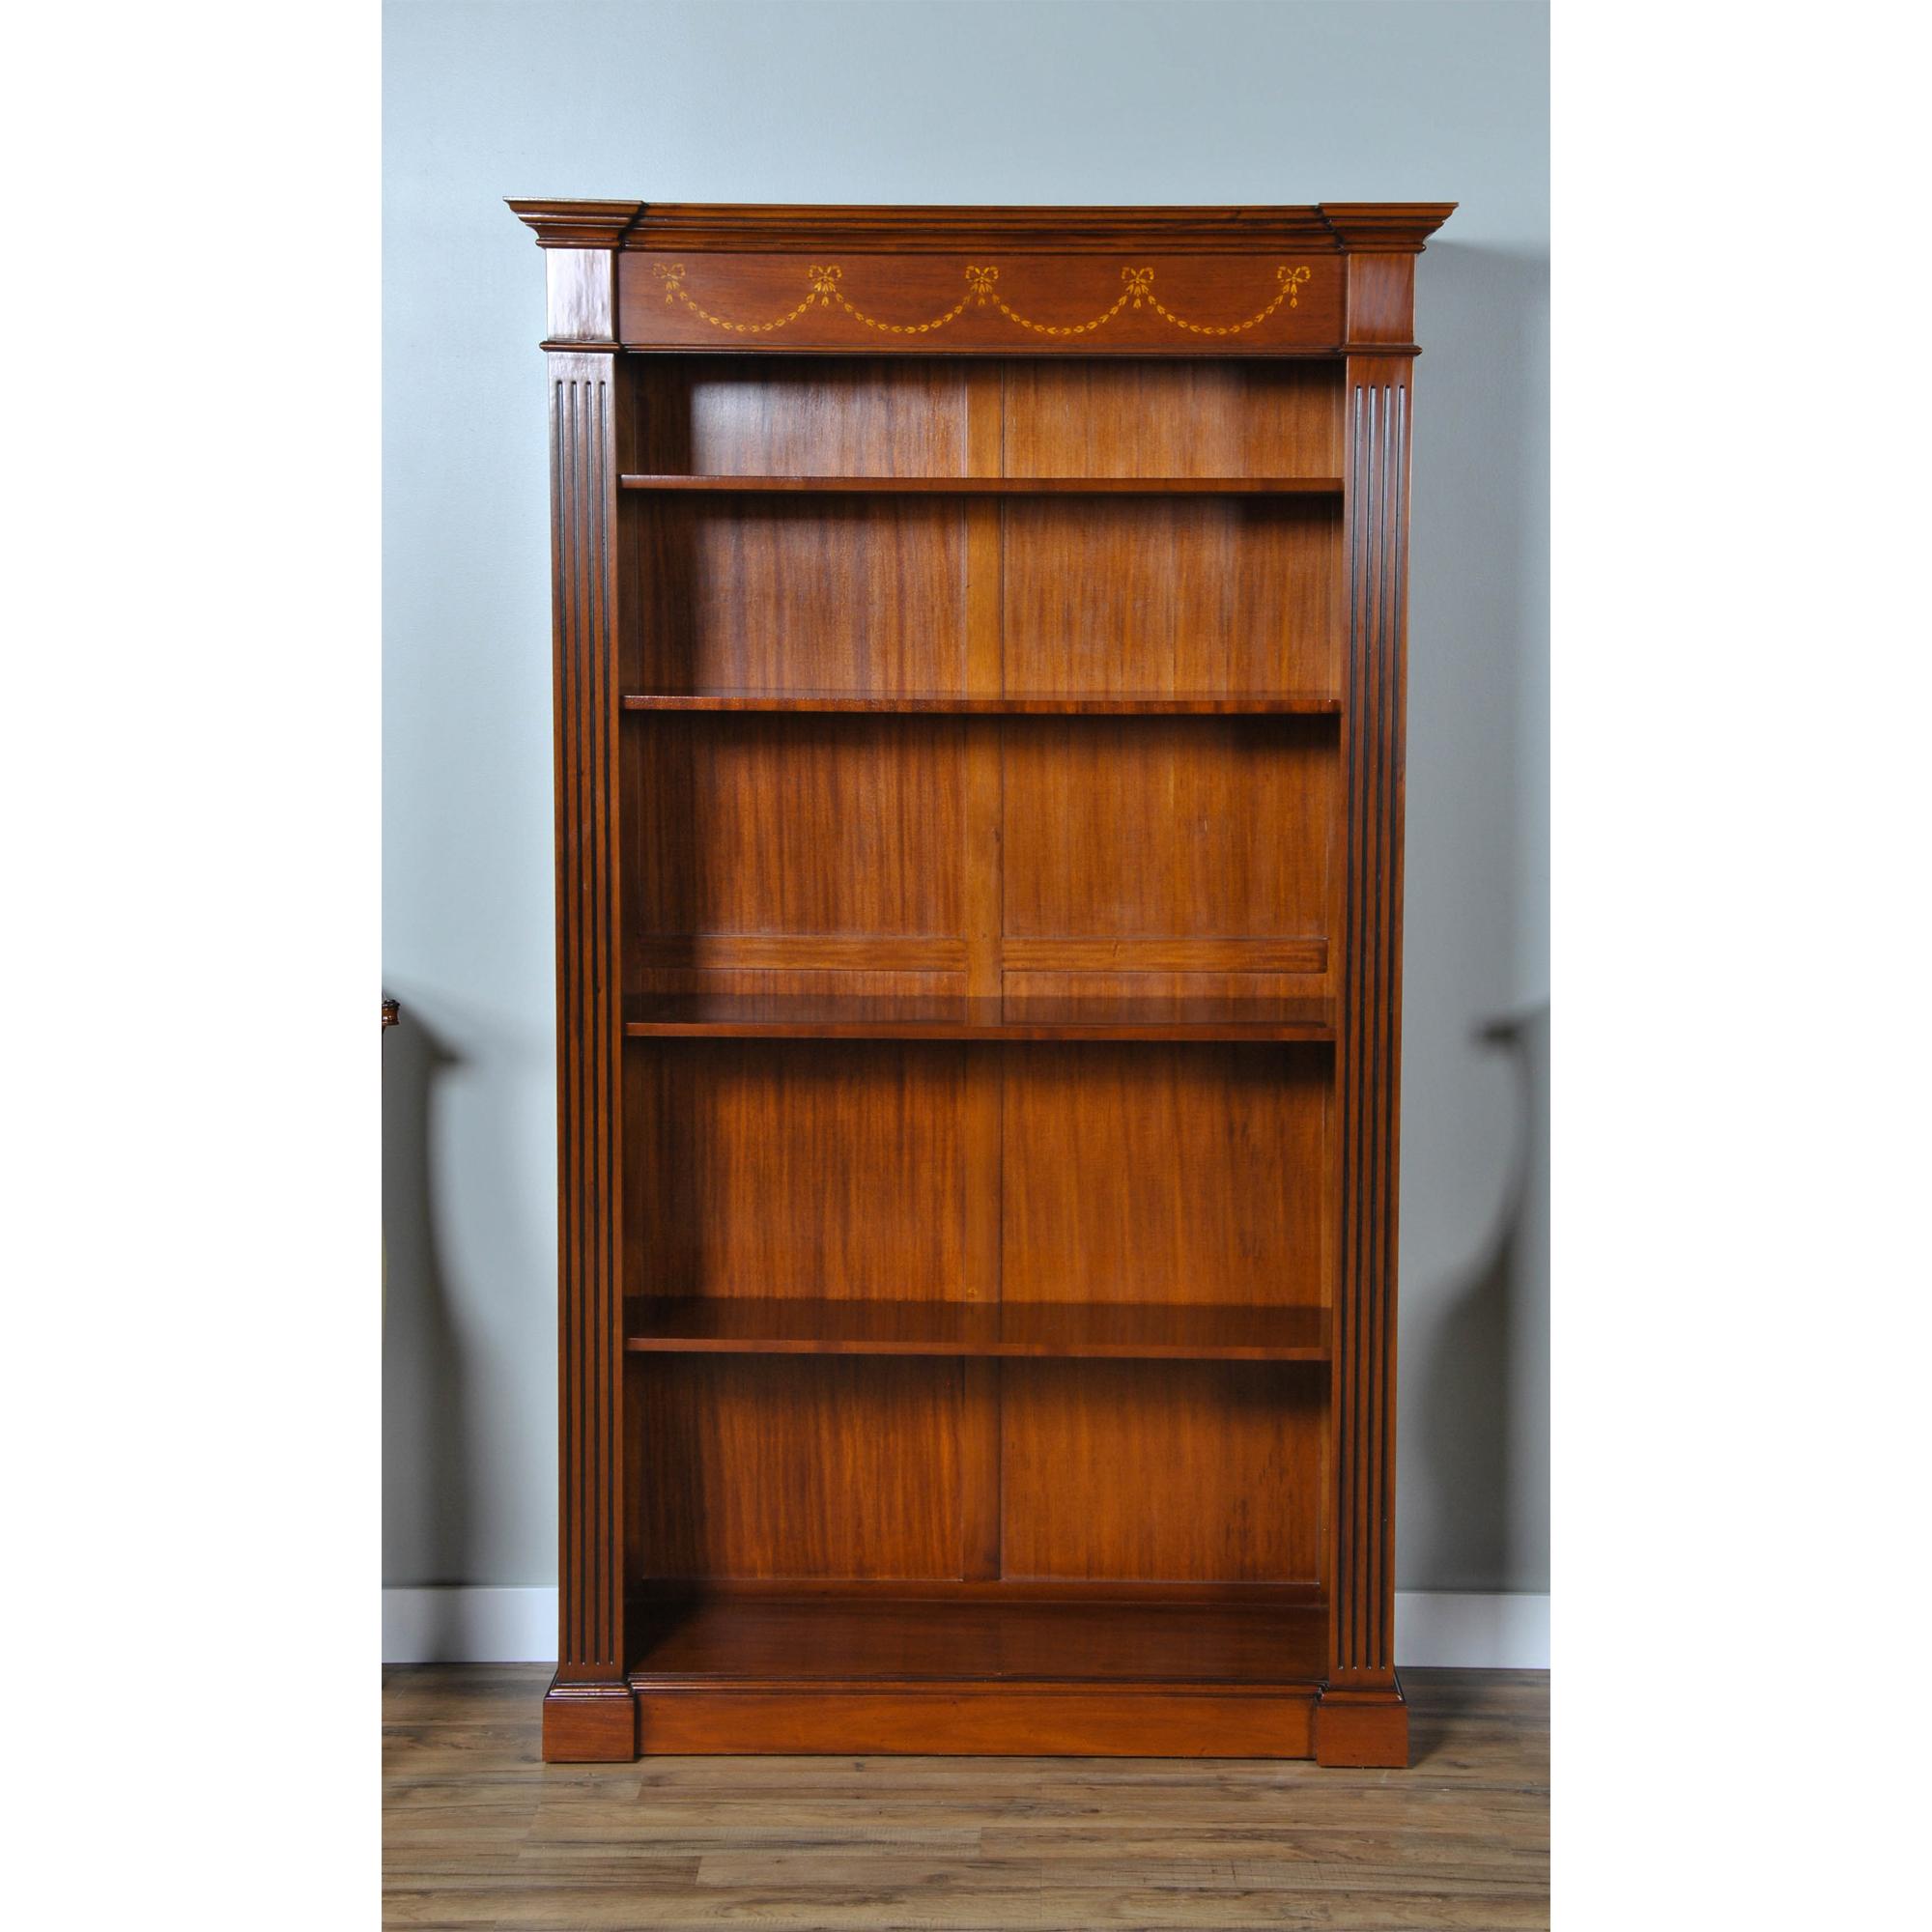 A Superb Quality Inlaid Mahogany Bookcase from Niagara Furniture with bellflower and satinwood inlay decorative details. The top section with a moulded cornice featuring hand cut satinwood inlays in a drape pattern. The open section being flanked by